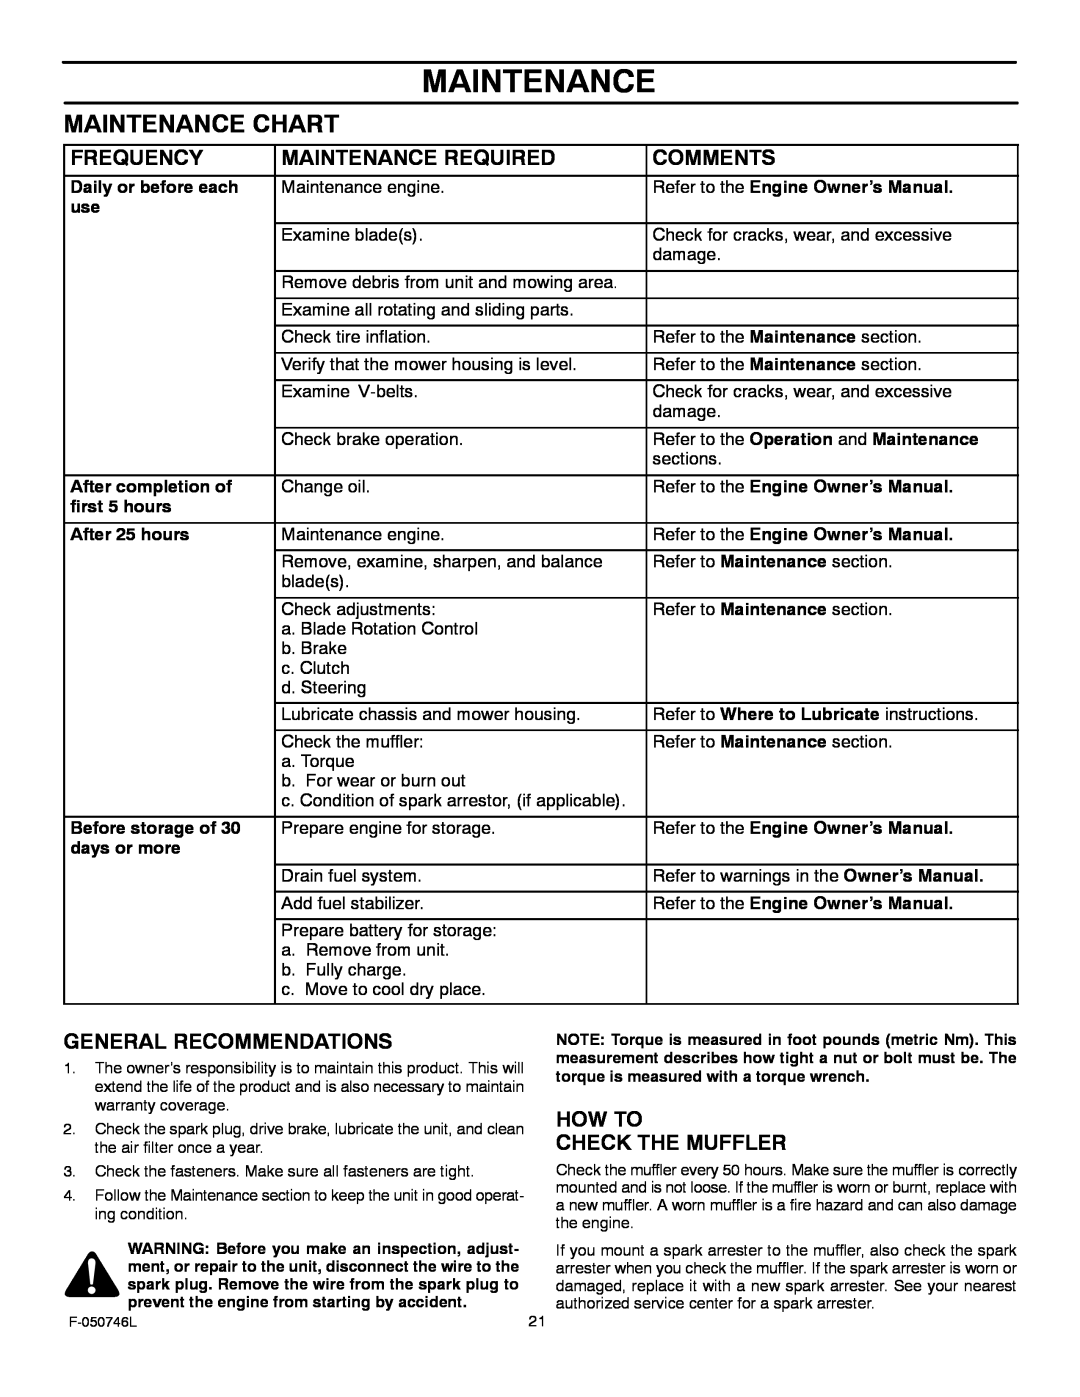 Murray 425016x48A manual Maintenance Chart, Frequency, Maintenance Required, Comments, General Recommendations 